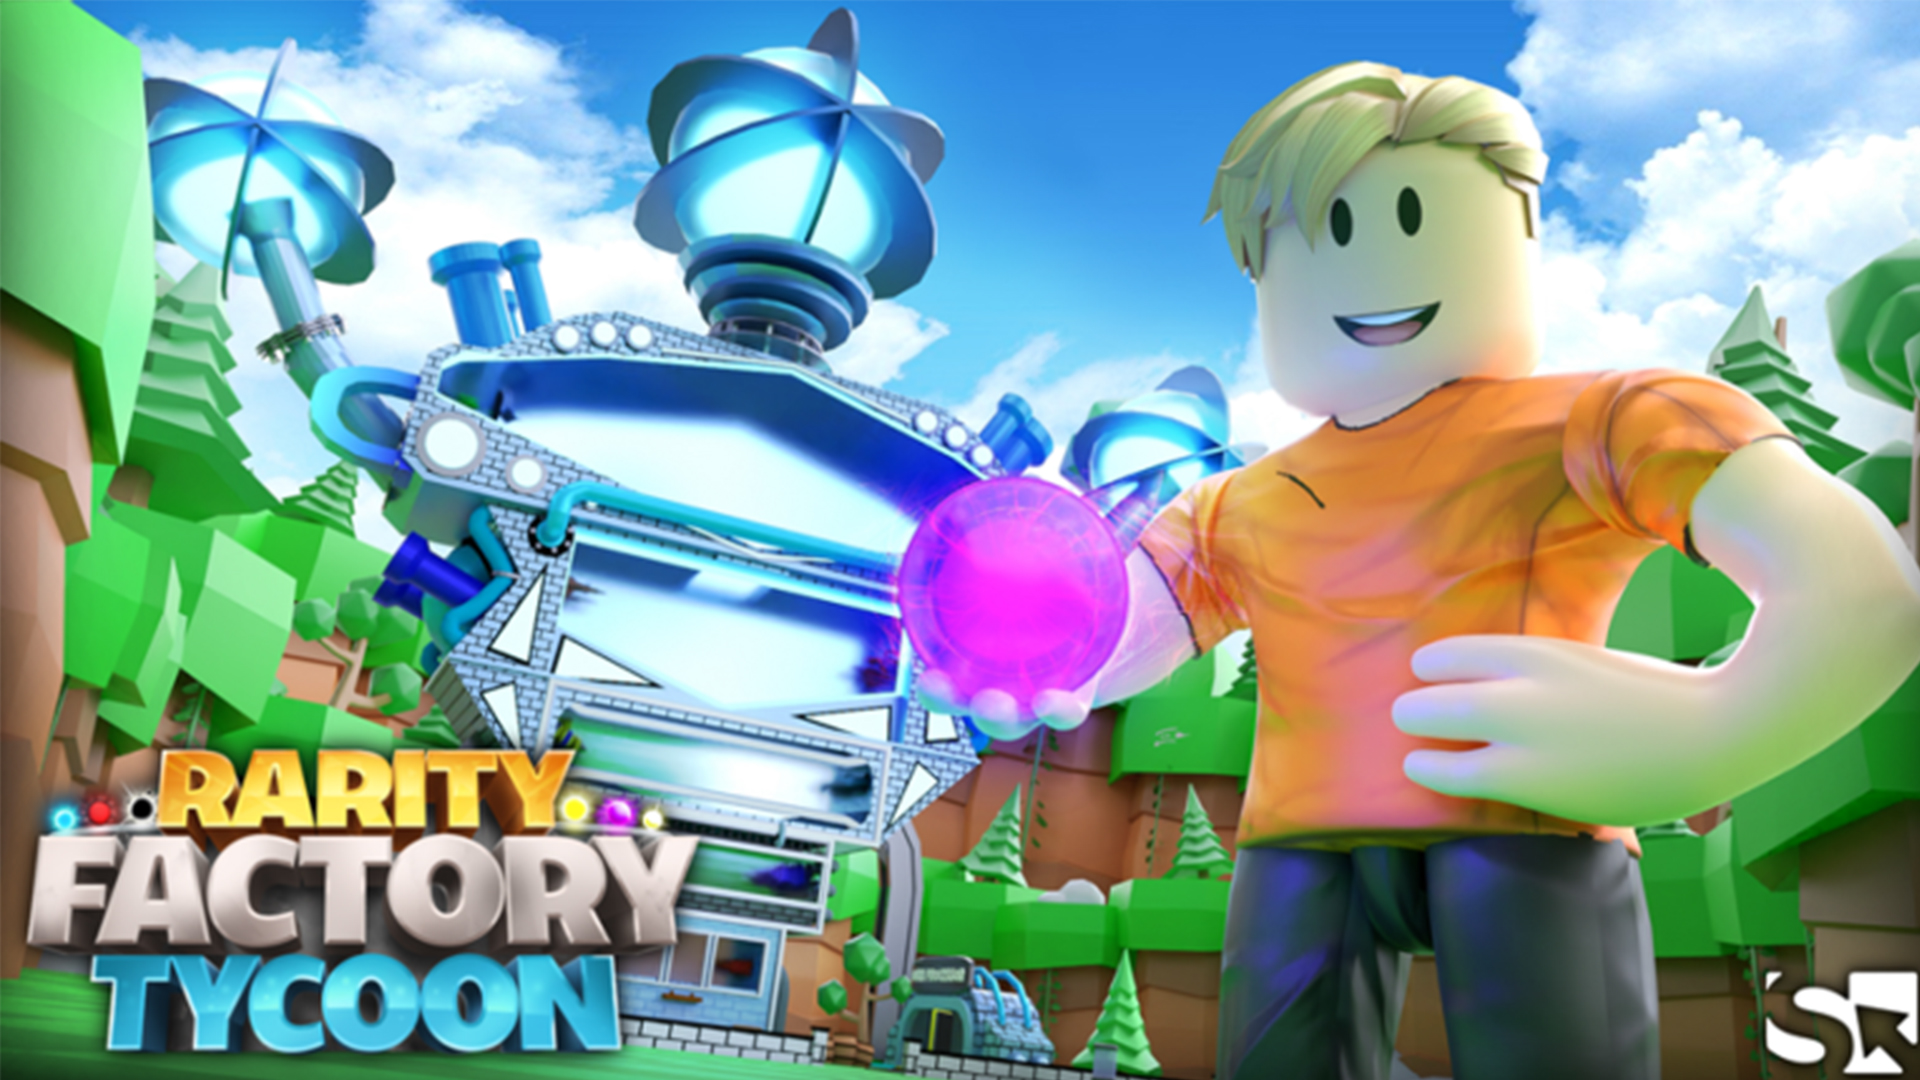 Rarity Factory Tycoon Codes for December 2023 - Try Hard Guides